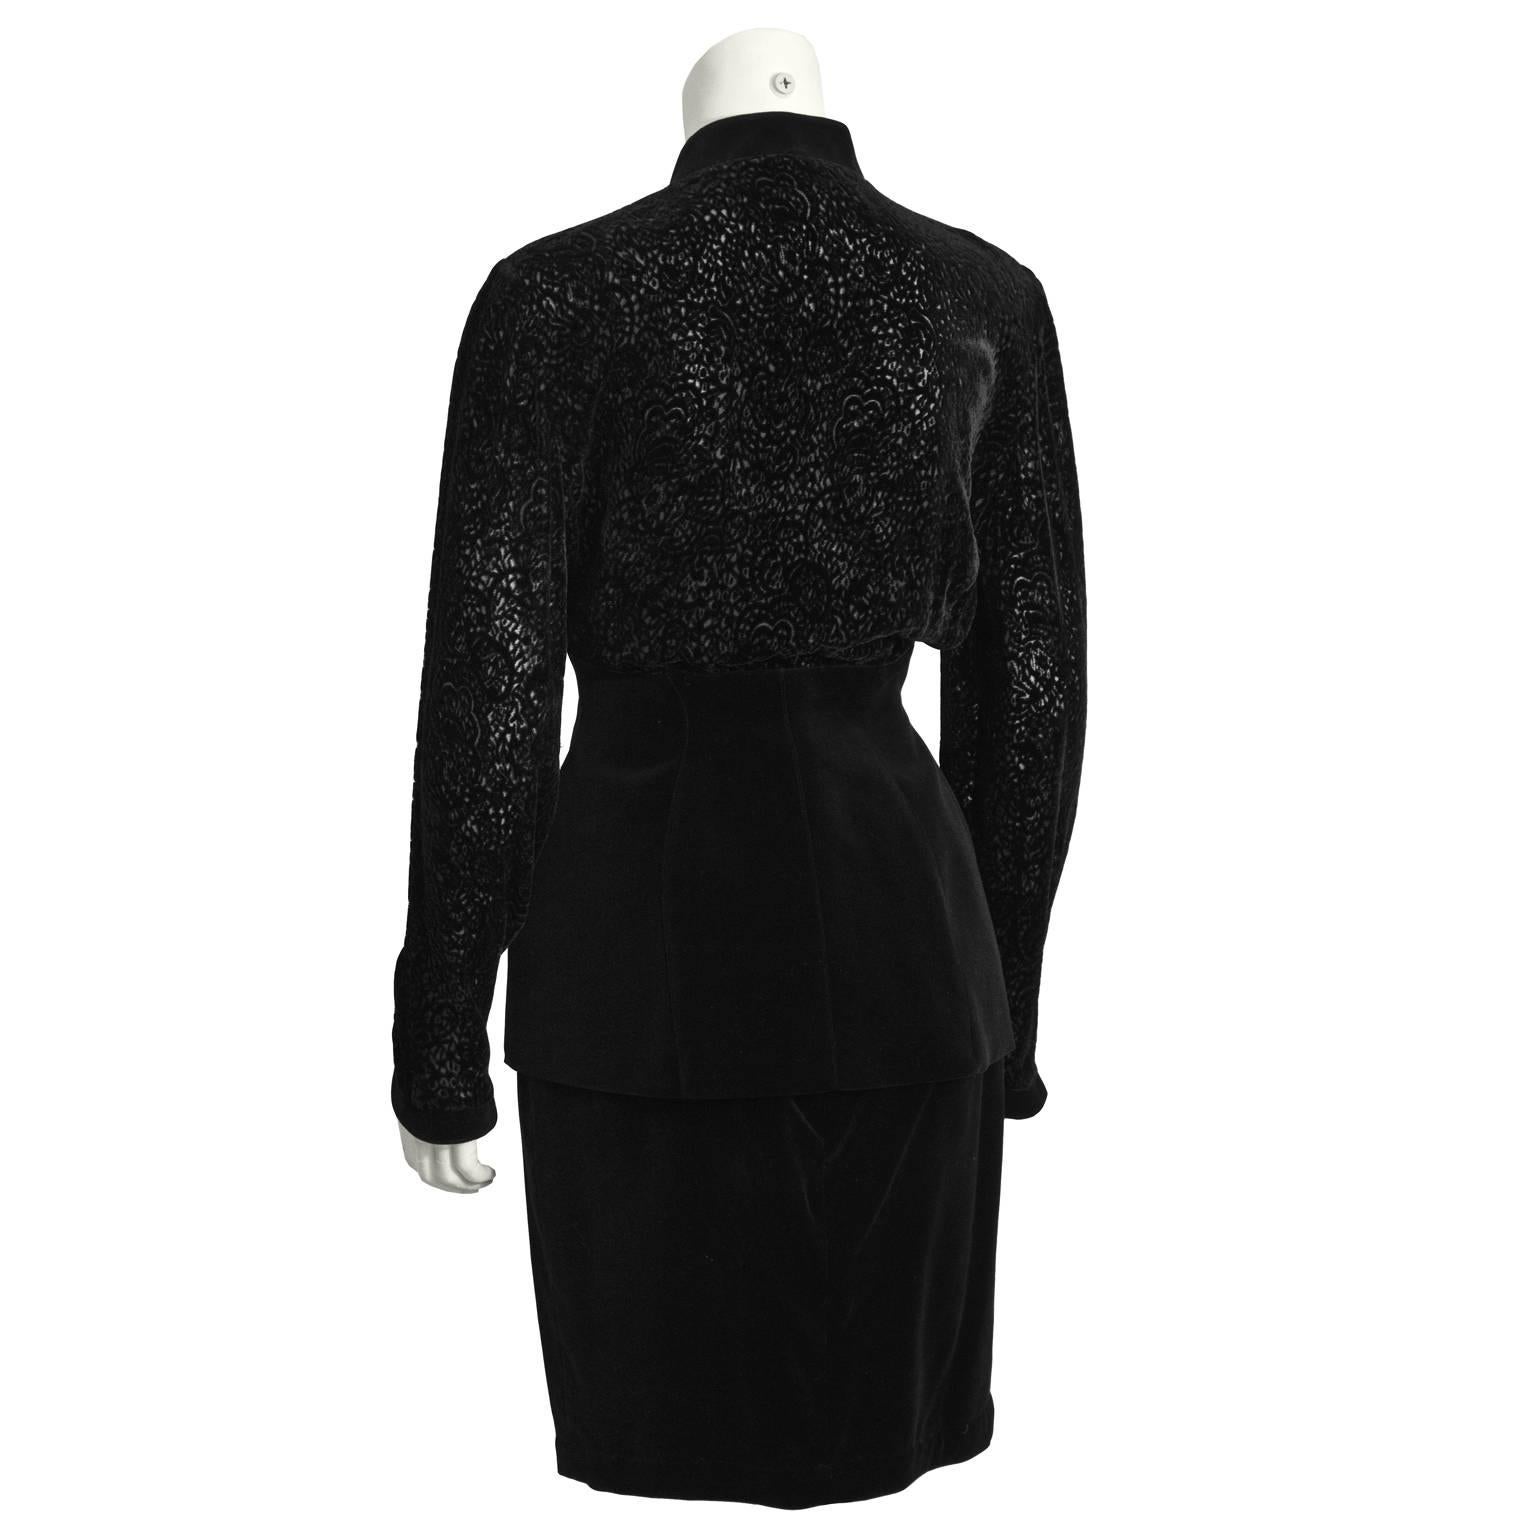 This fabulous and unique Thierry Mugler black velvet skirt suit dates from the 1980's. Jacket features a loose fitting flocked velvet bodice, with a cinched corset waist, and a front snap button closure. Black velvet pencil skirt has two fixed